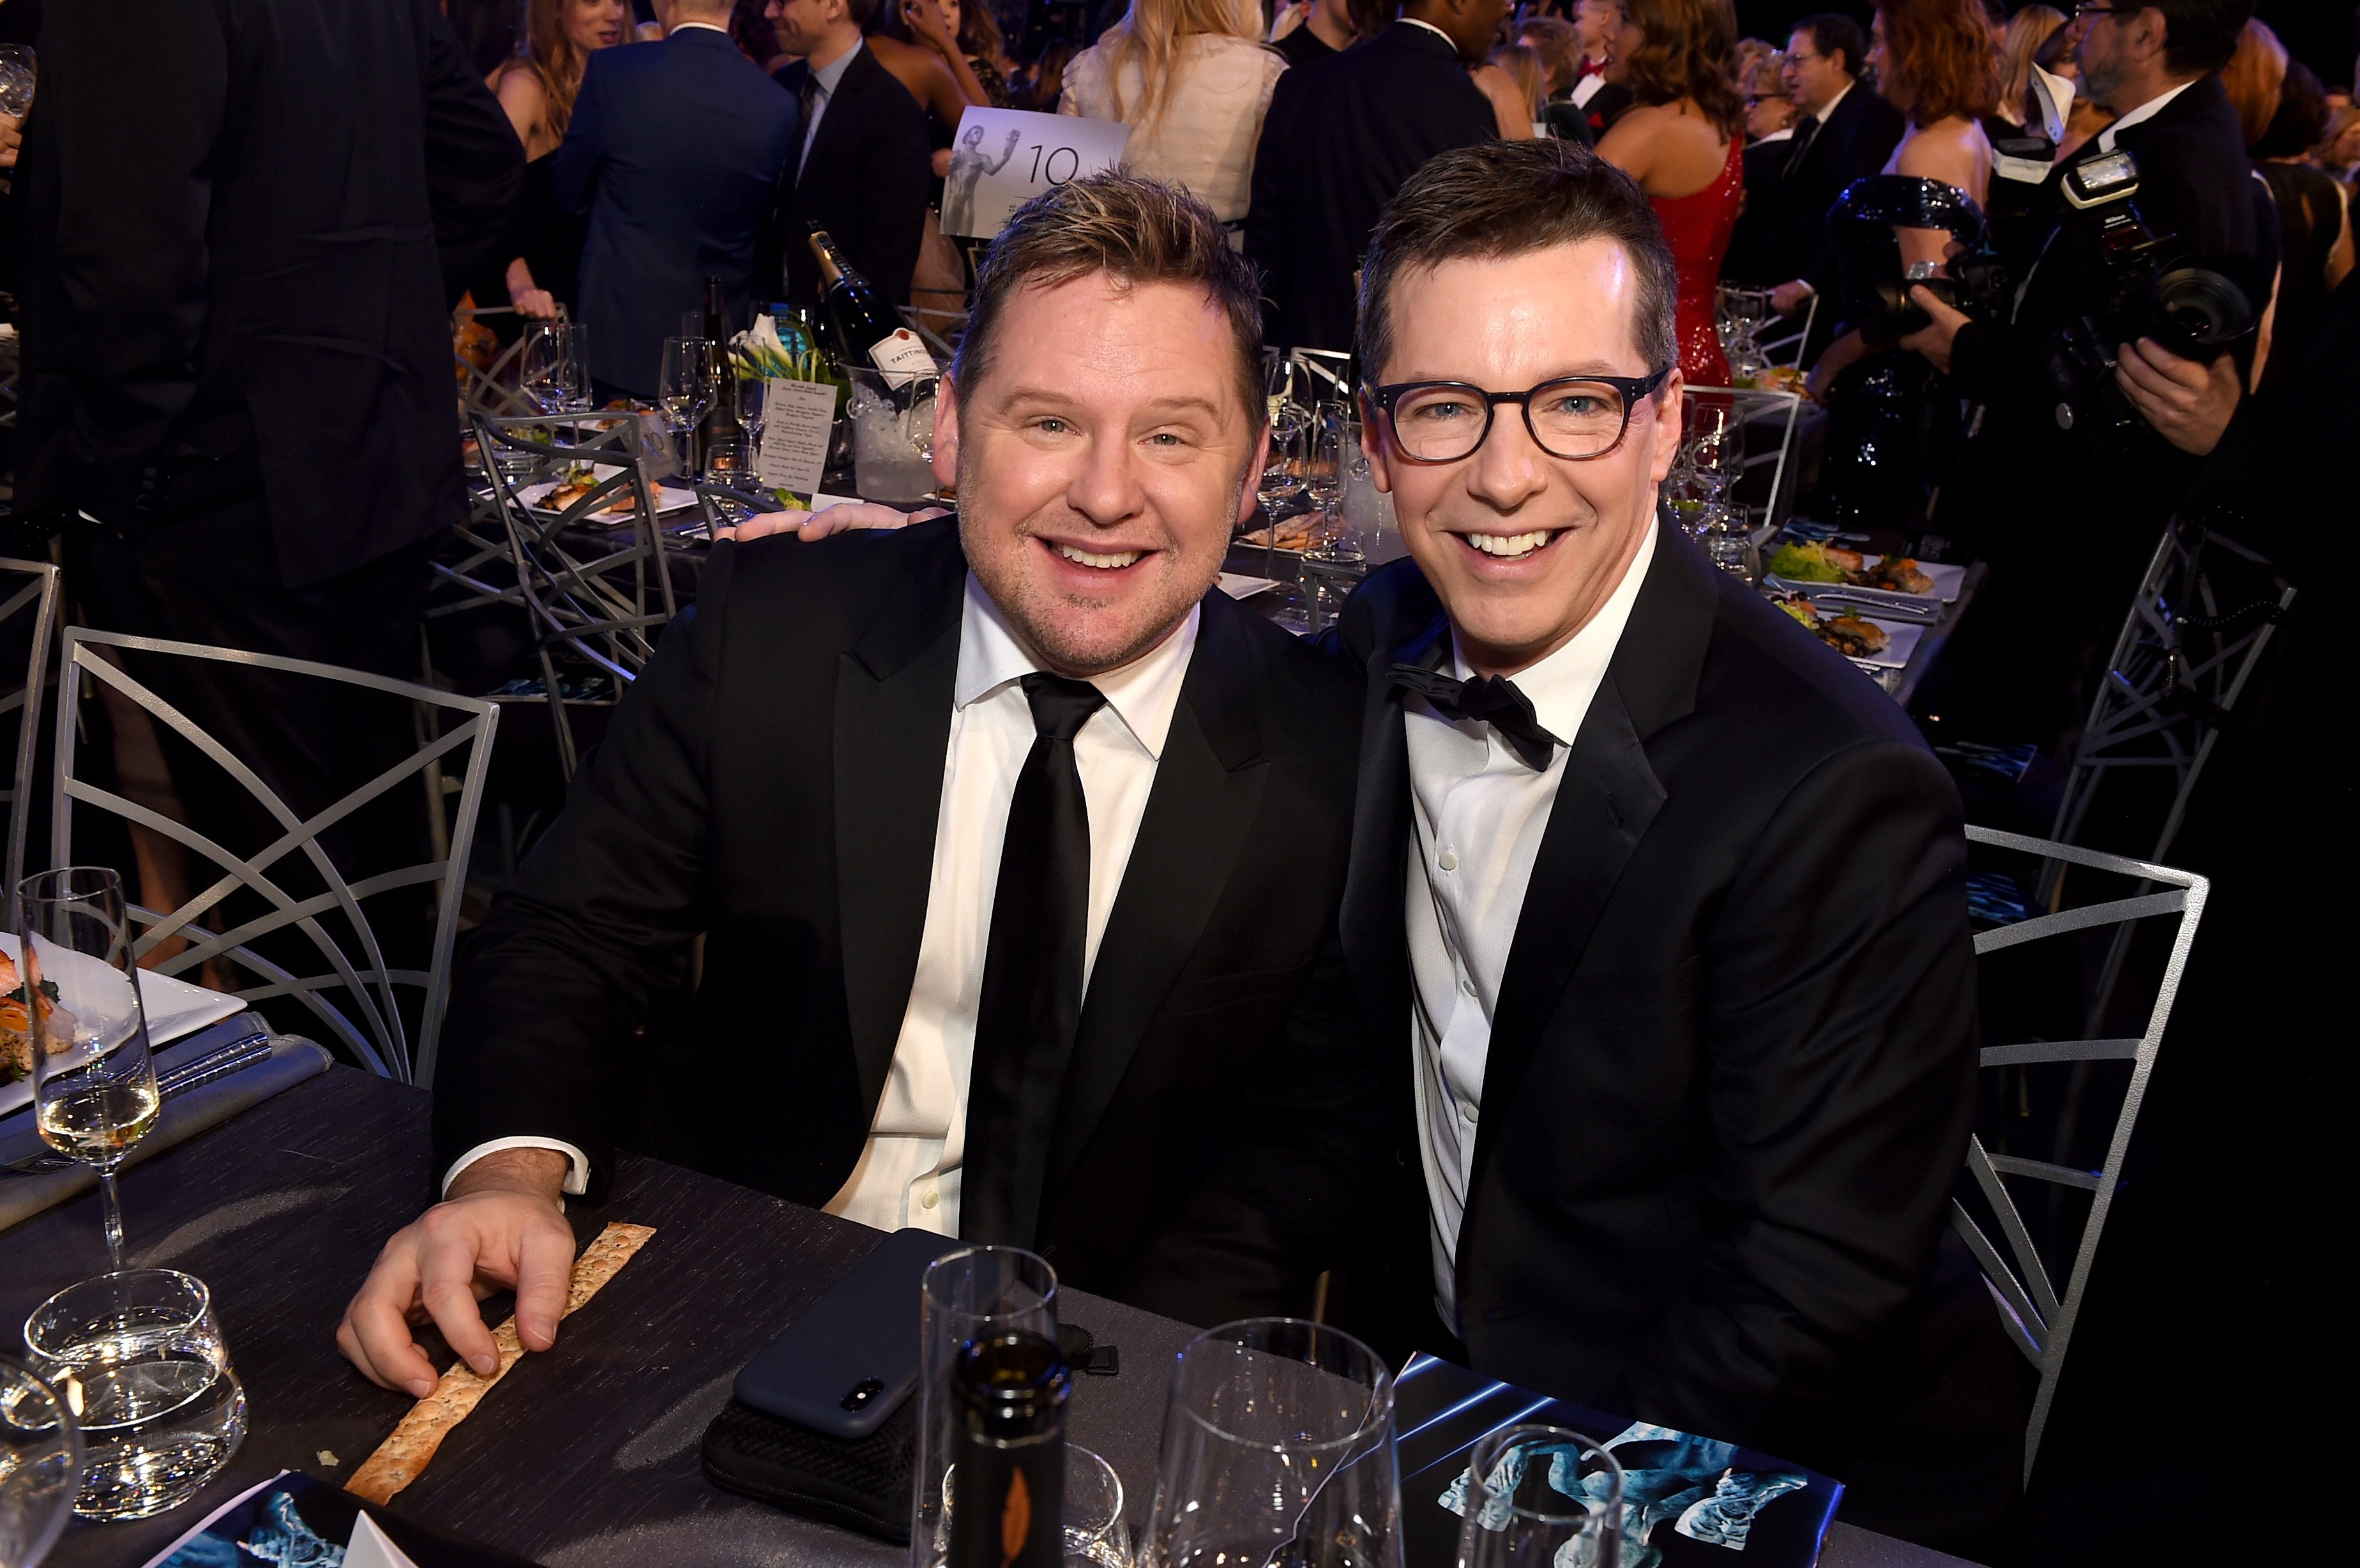 Scott Icenogle and Sean Hayes pose at the 24th Annual Screen Actors Guild Awards on January 21, 2018, in Los Angeles | Source: Getty Images